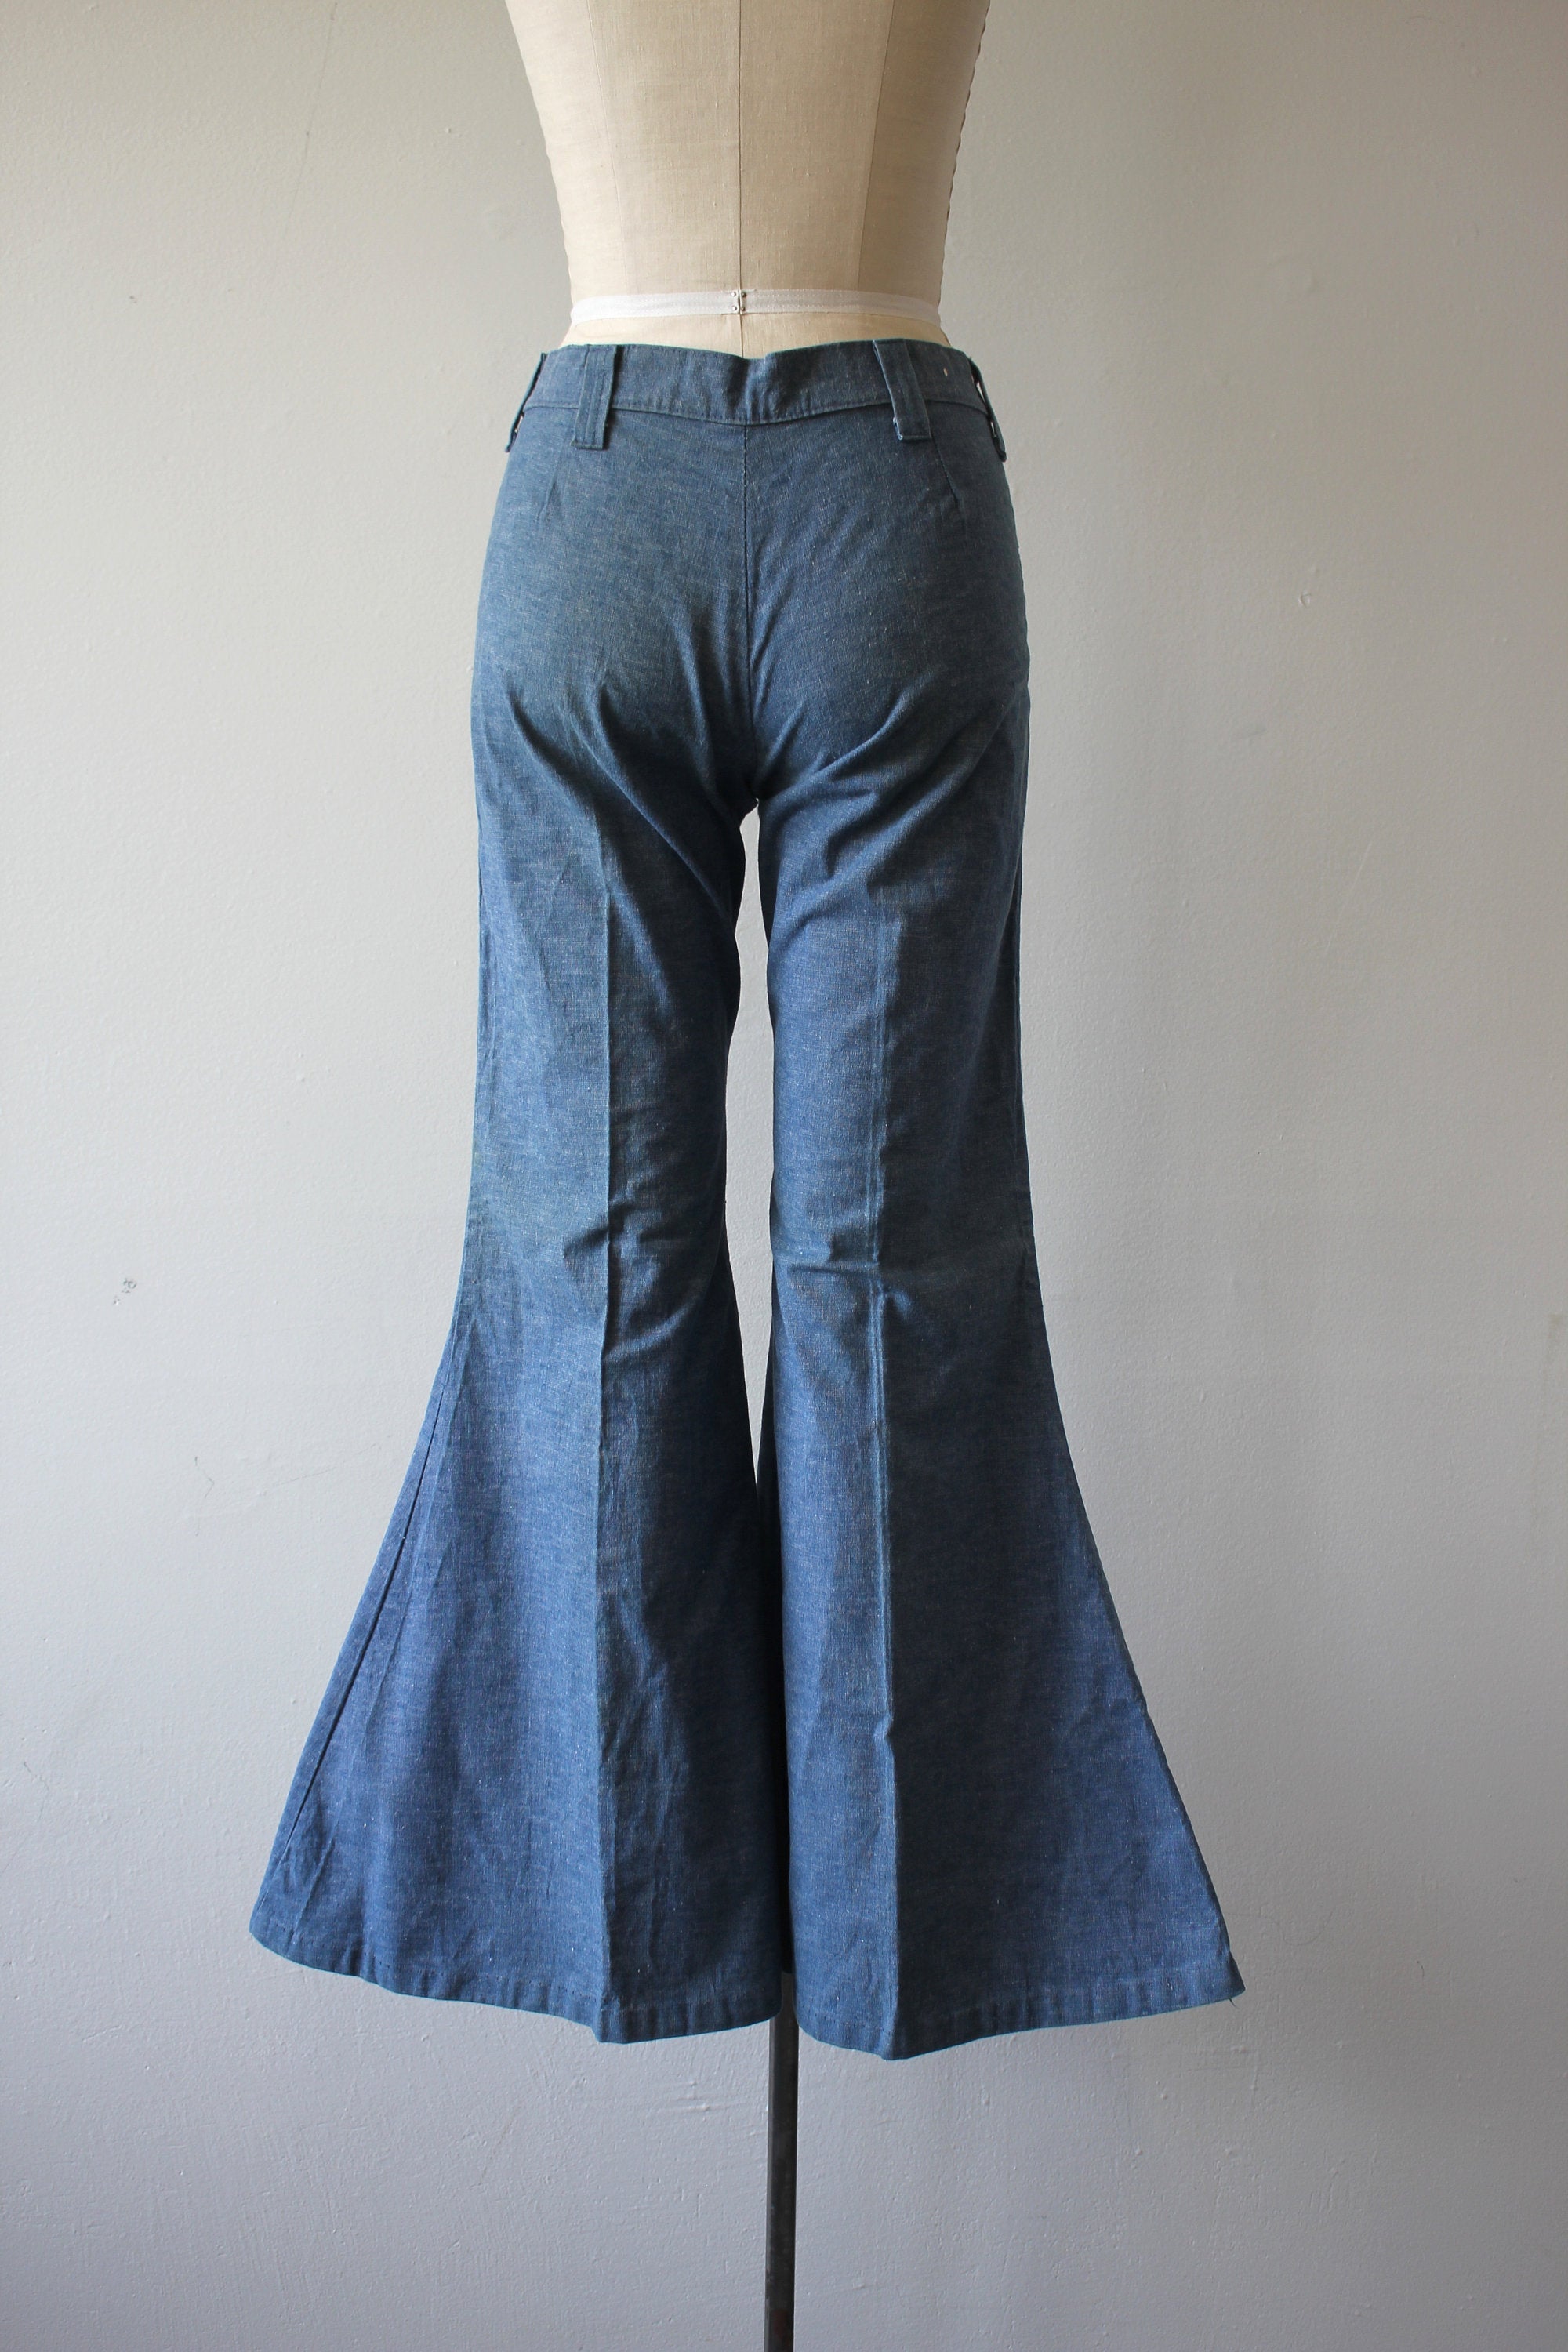 Vintage 70's High Waisted Extreme Bell Bottom Jeans by Anvil Brand